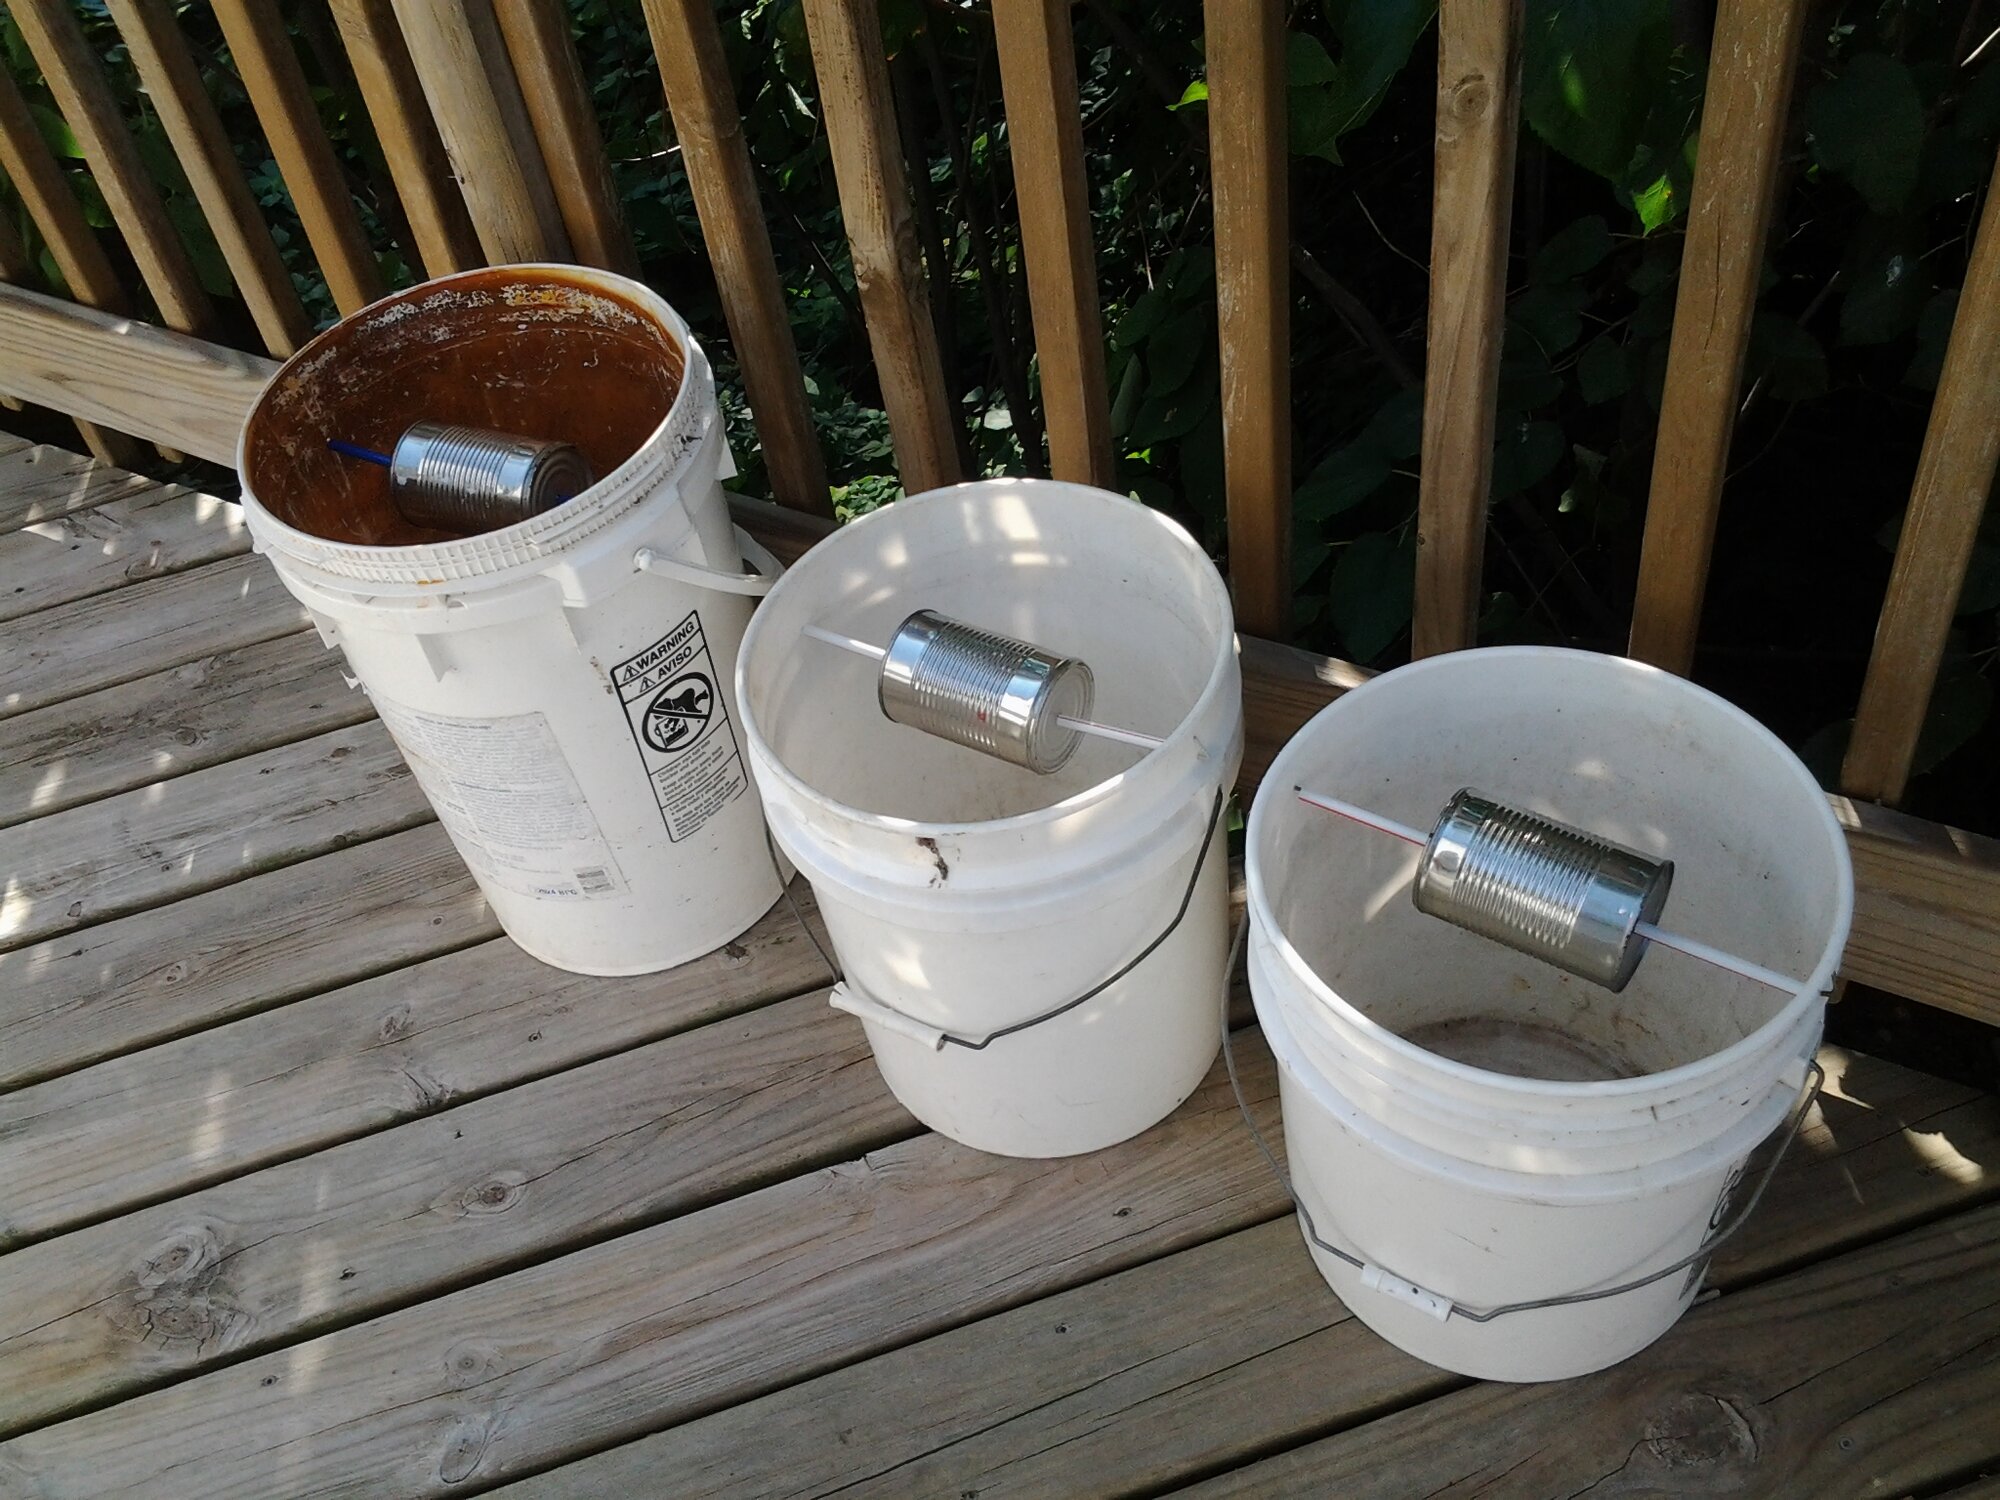 5 Gallon Bucket mouse trap  BackYard Chickens - Learn How to Raise Chickens